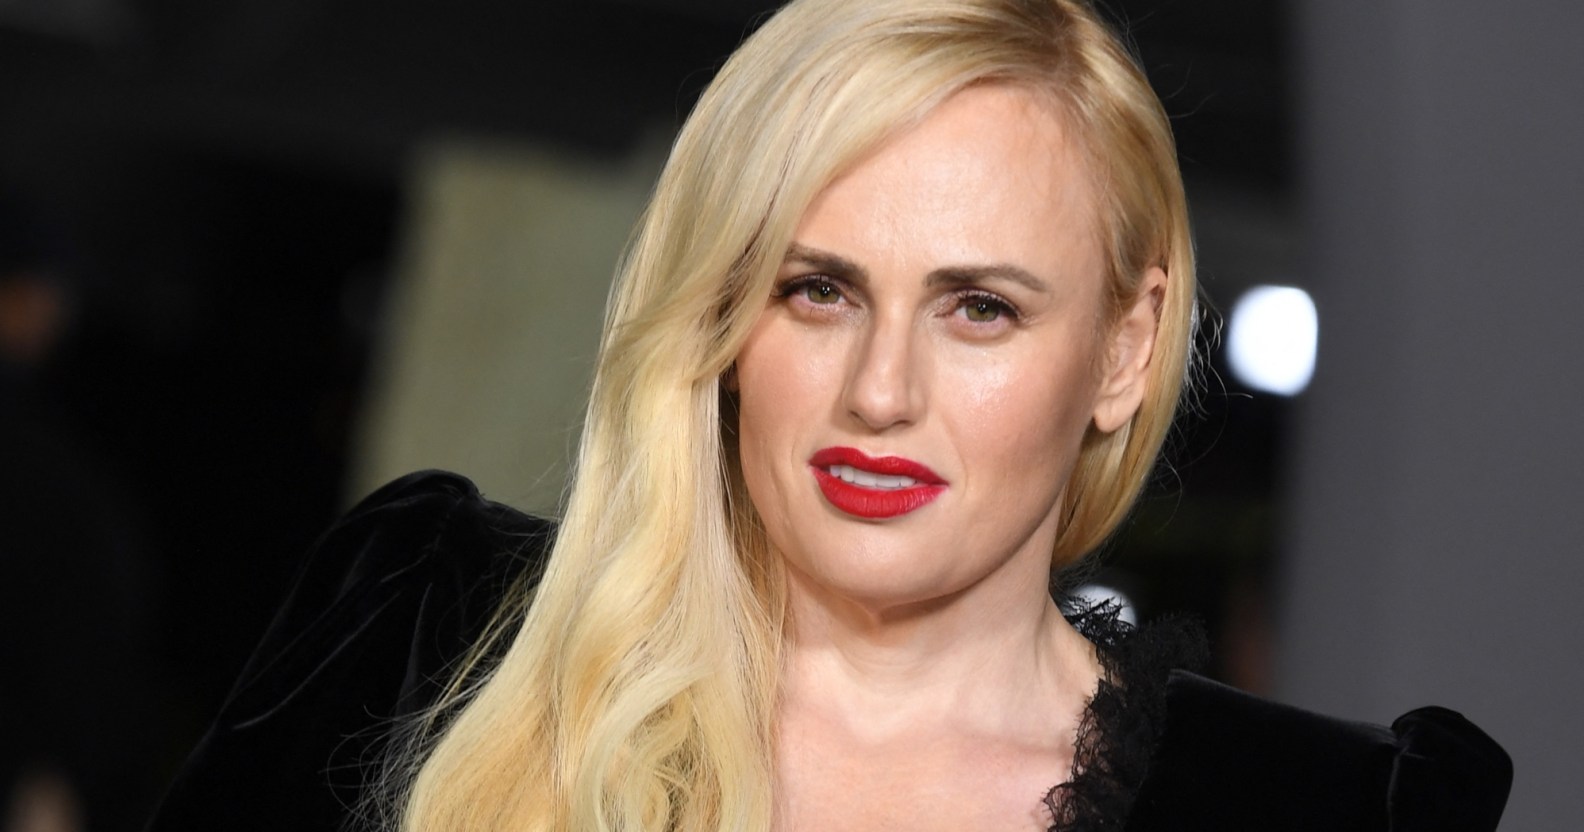 Rebel Wilson slightly tilted wearing red lipstick and a black dress, cropped to show her shoulder and head (Getty)